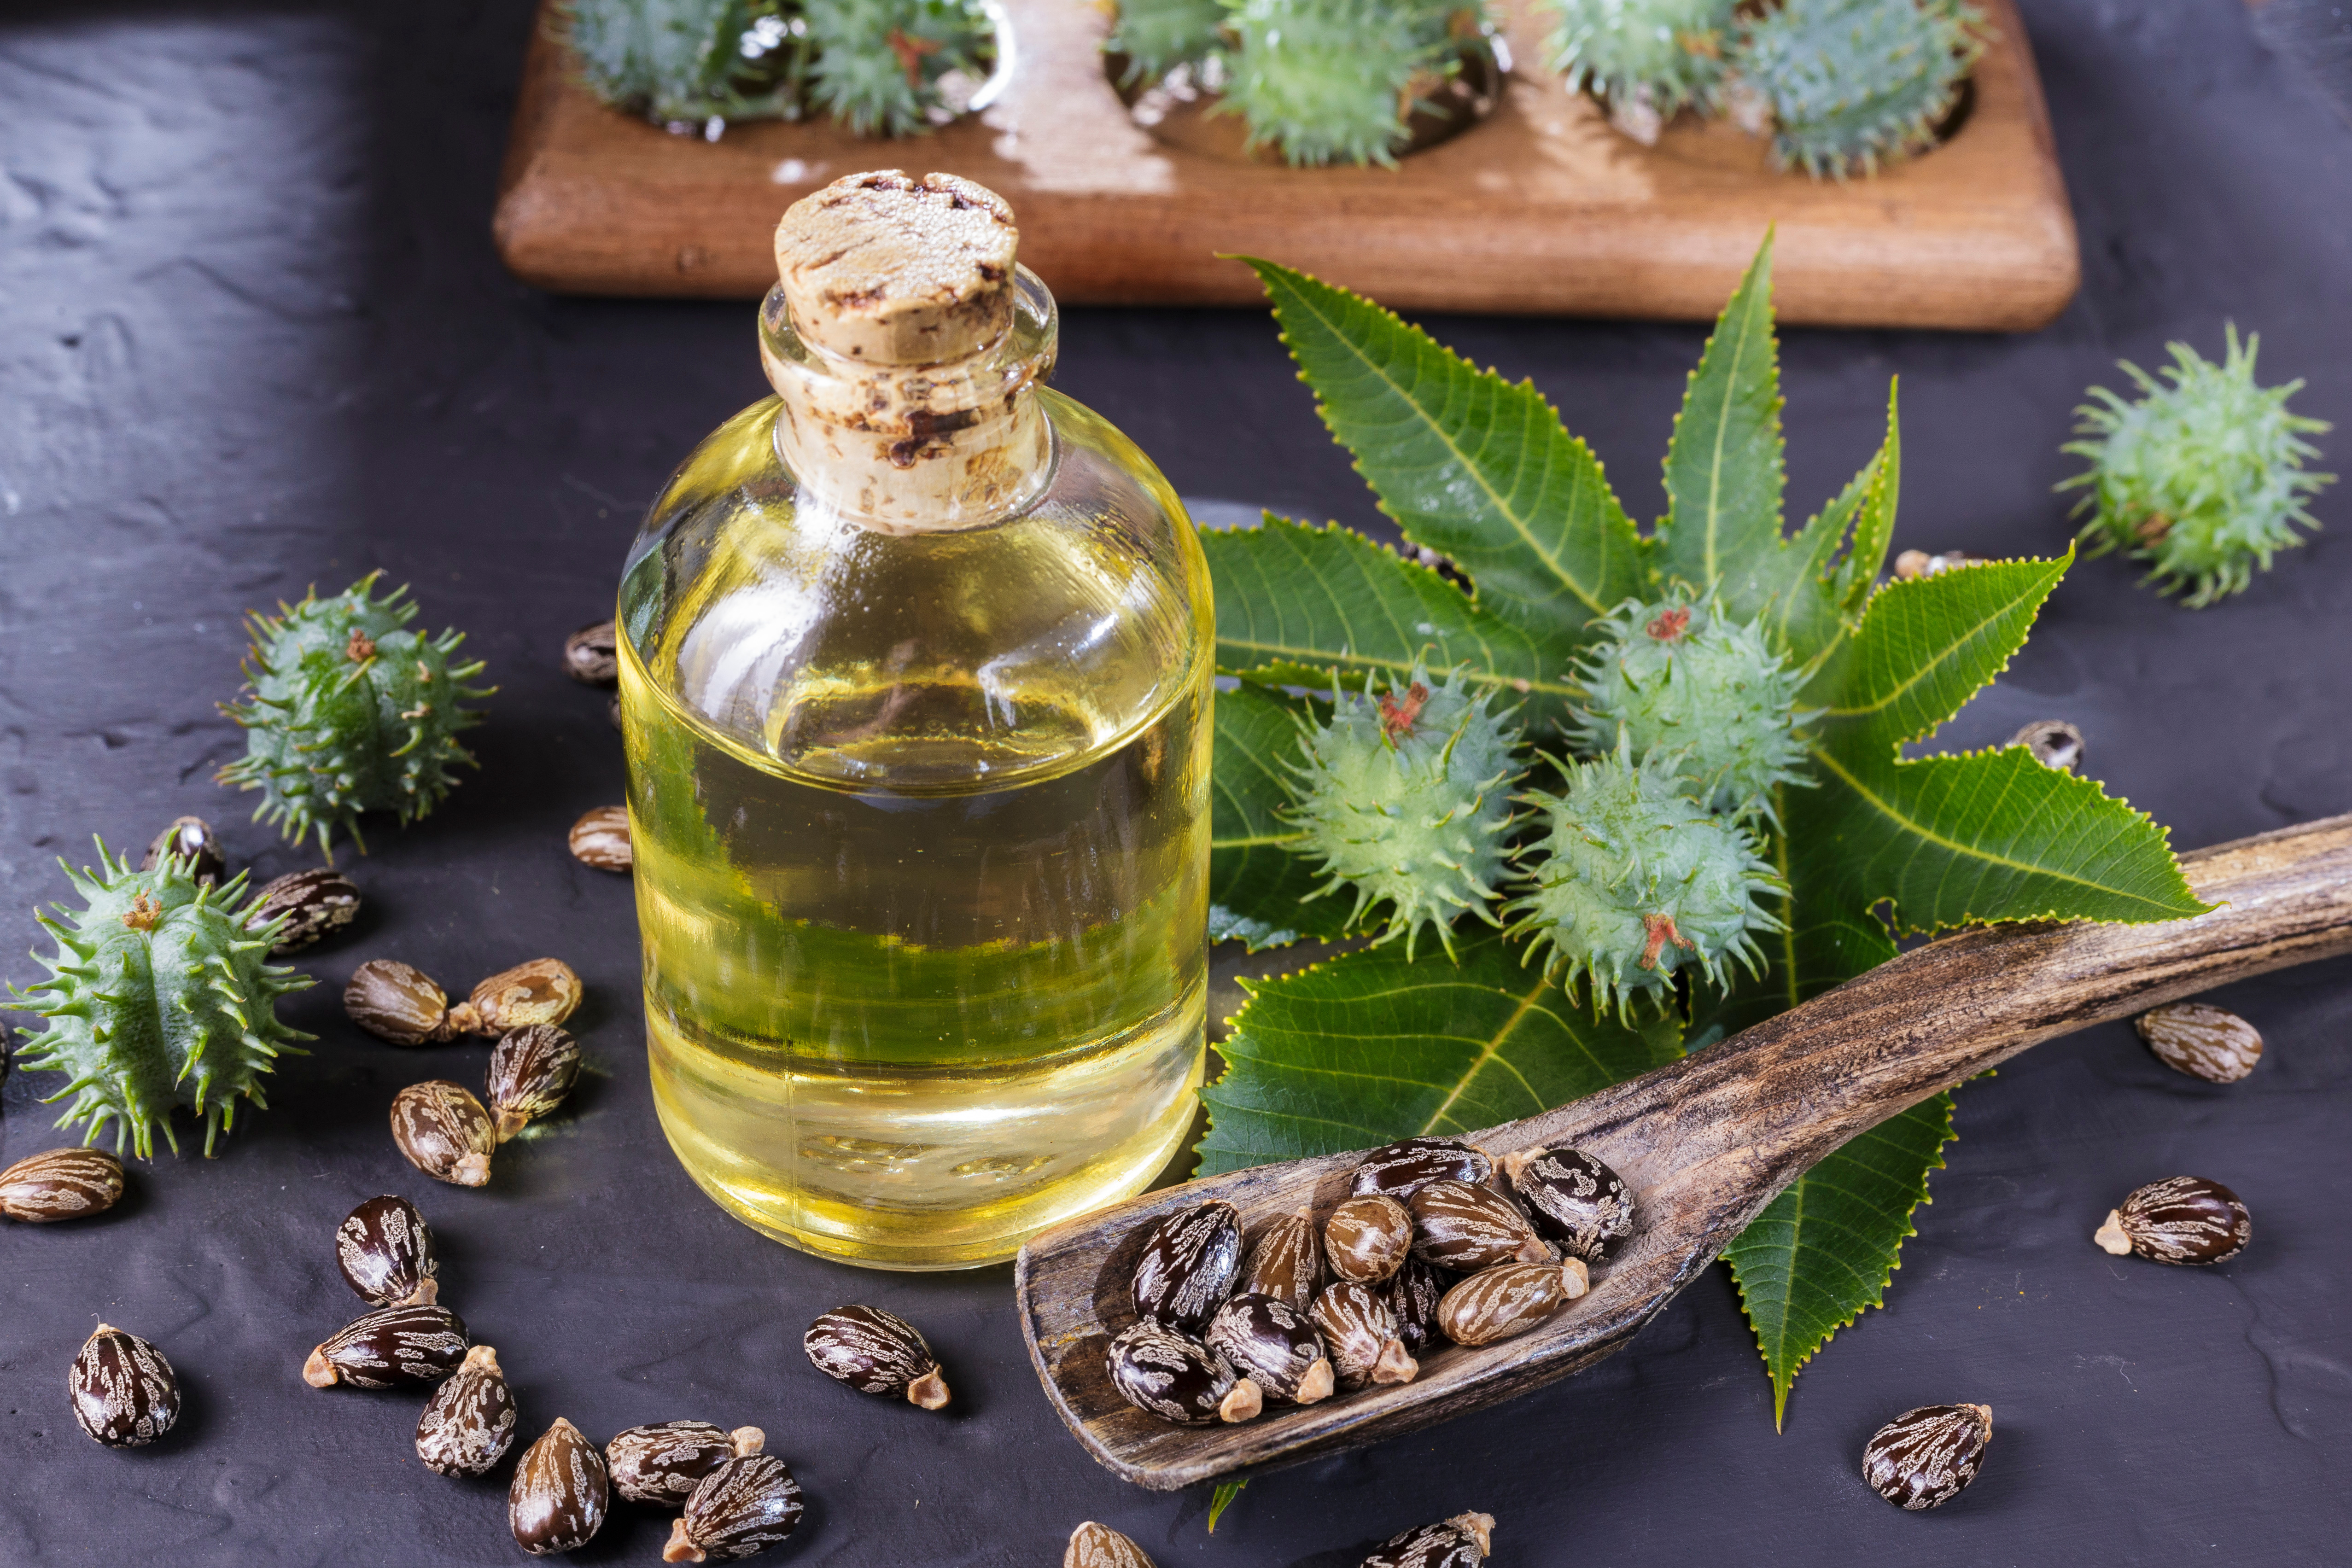 Castor oil is a vegetable oil made from castor beans, which are not edible and can grow on semi-arid and arid land unsuitable for many other crops.